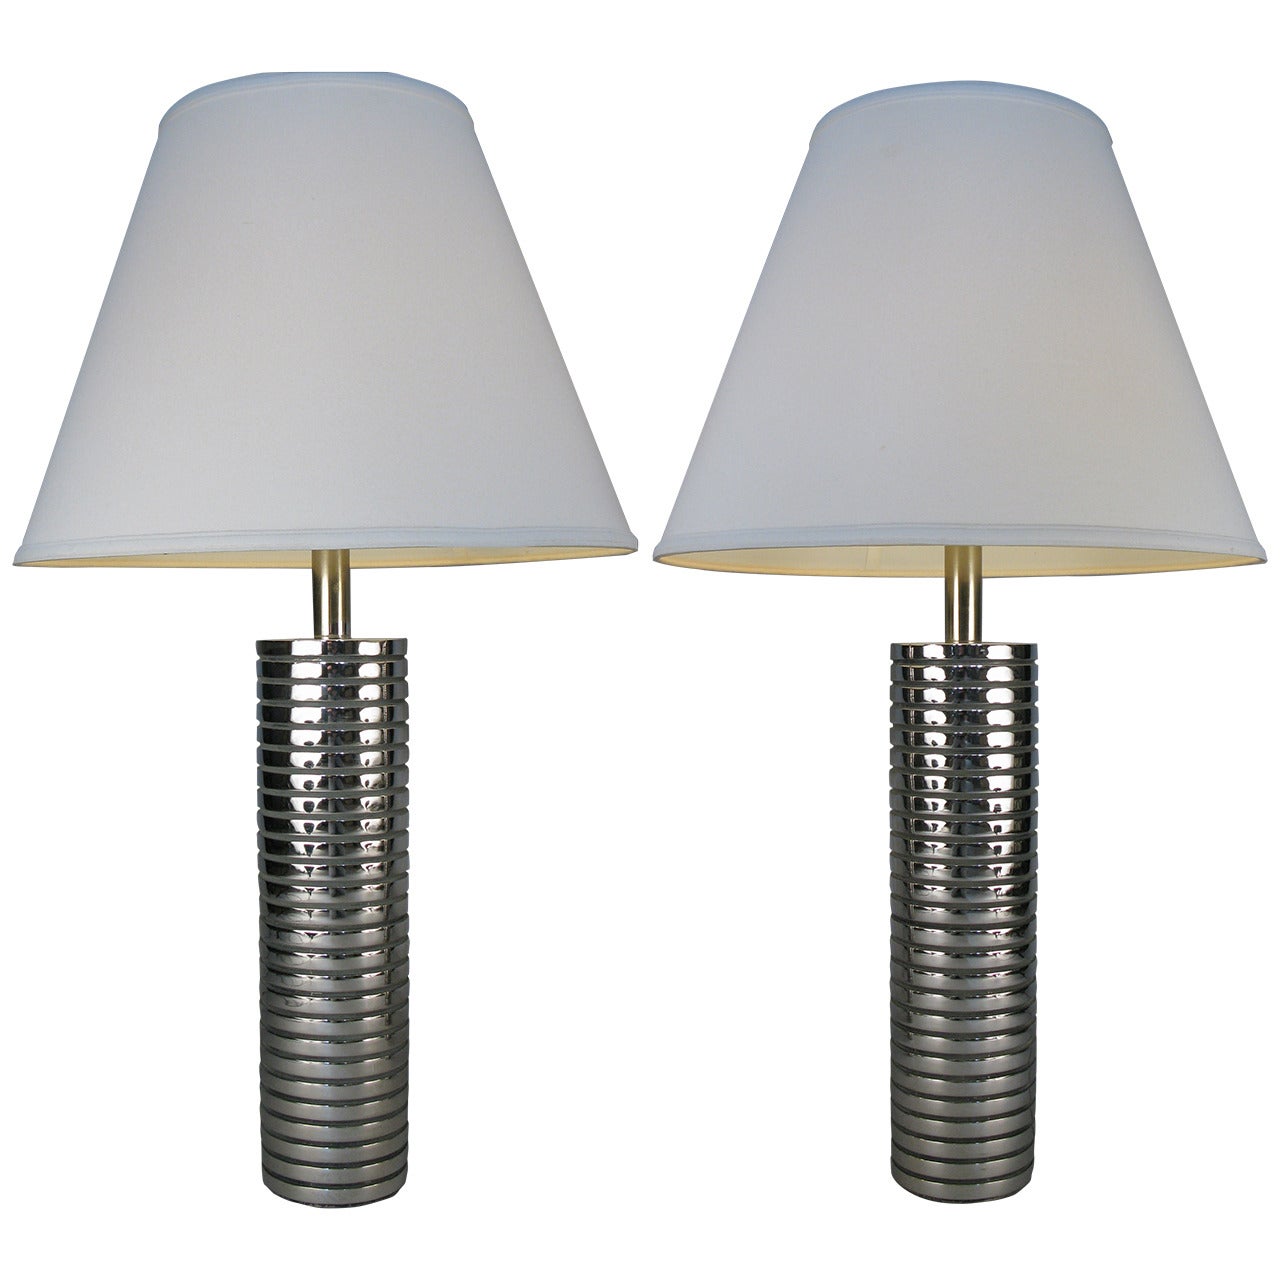 Pair of 1950s Chromed Steel Cylinder Table Lamps